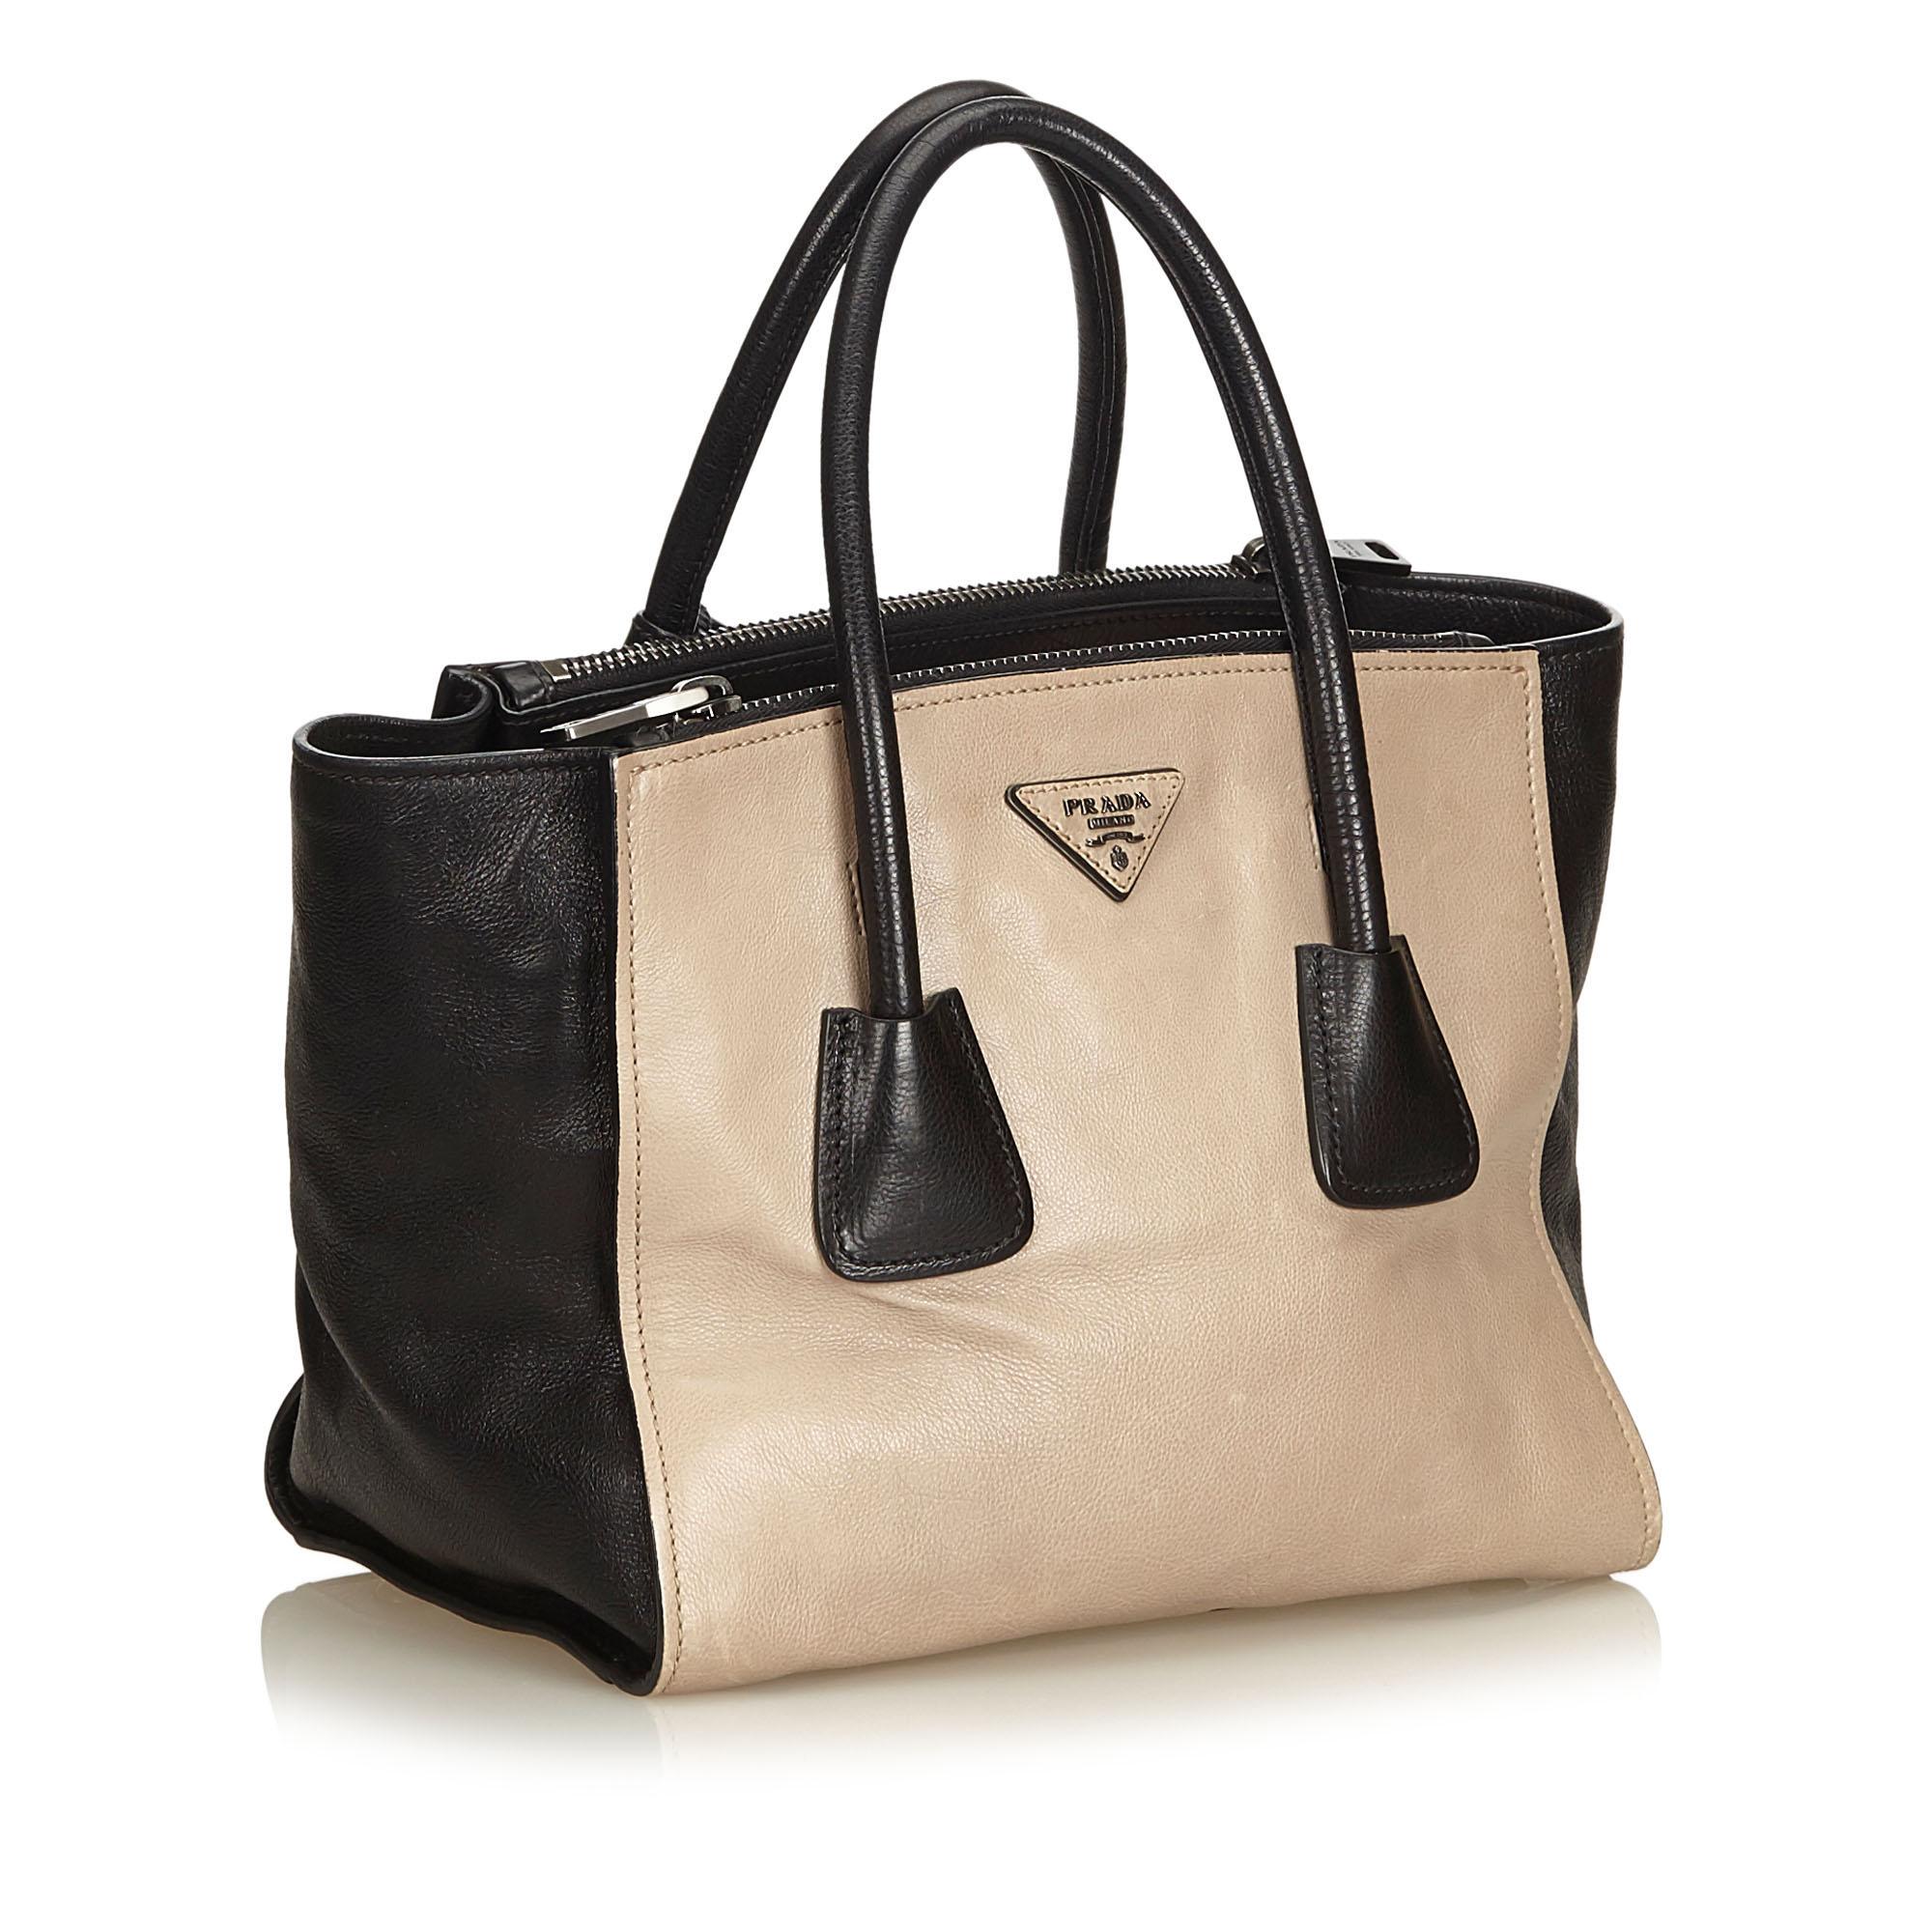 This tote features a calf leather body, rolled handles, open top with magnetic snap button closure, exterior zip compartments, and interior zip pockets.

It carries a B+ condition rating.

Dimensions: 
Length 22.00 cm
Width 39.00 cm
Depth 19.00